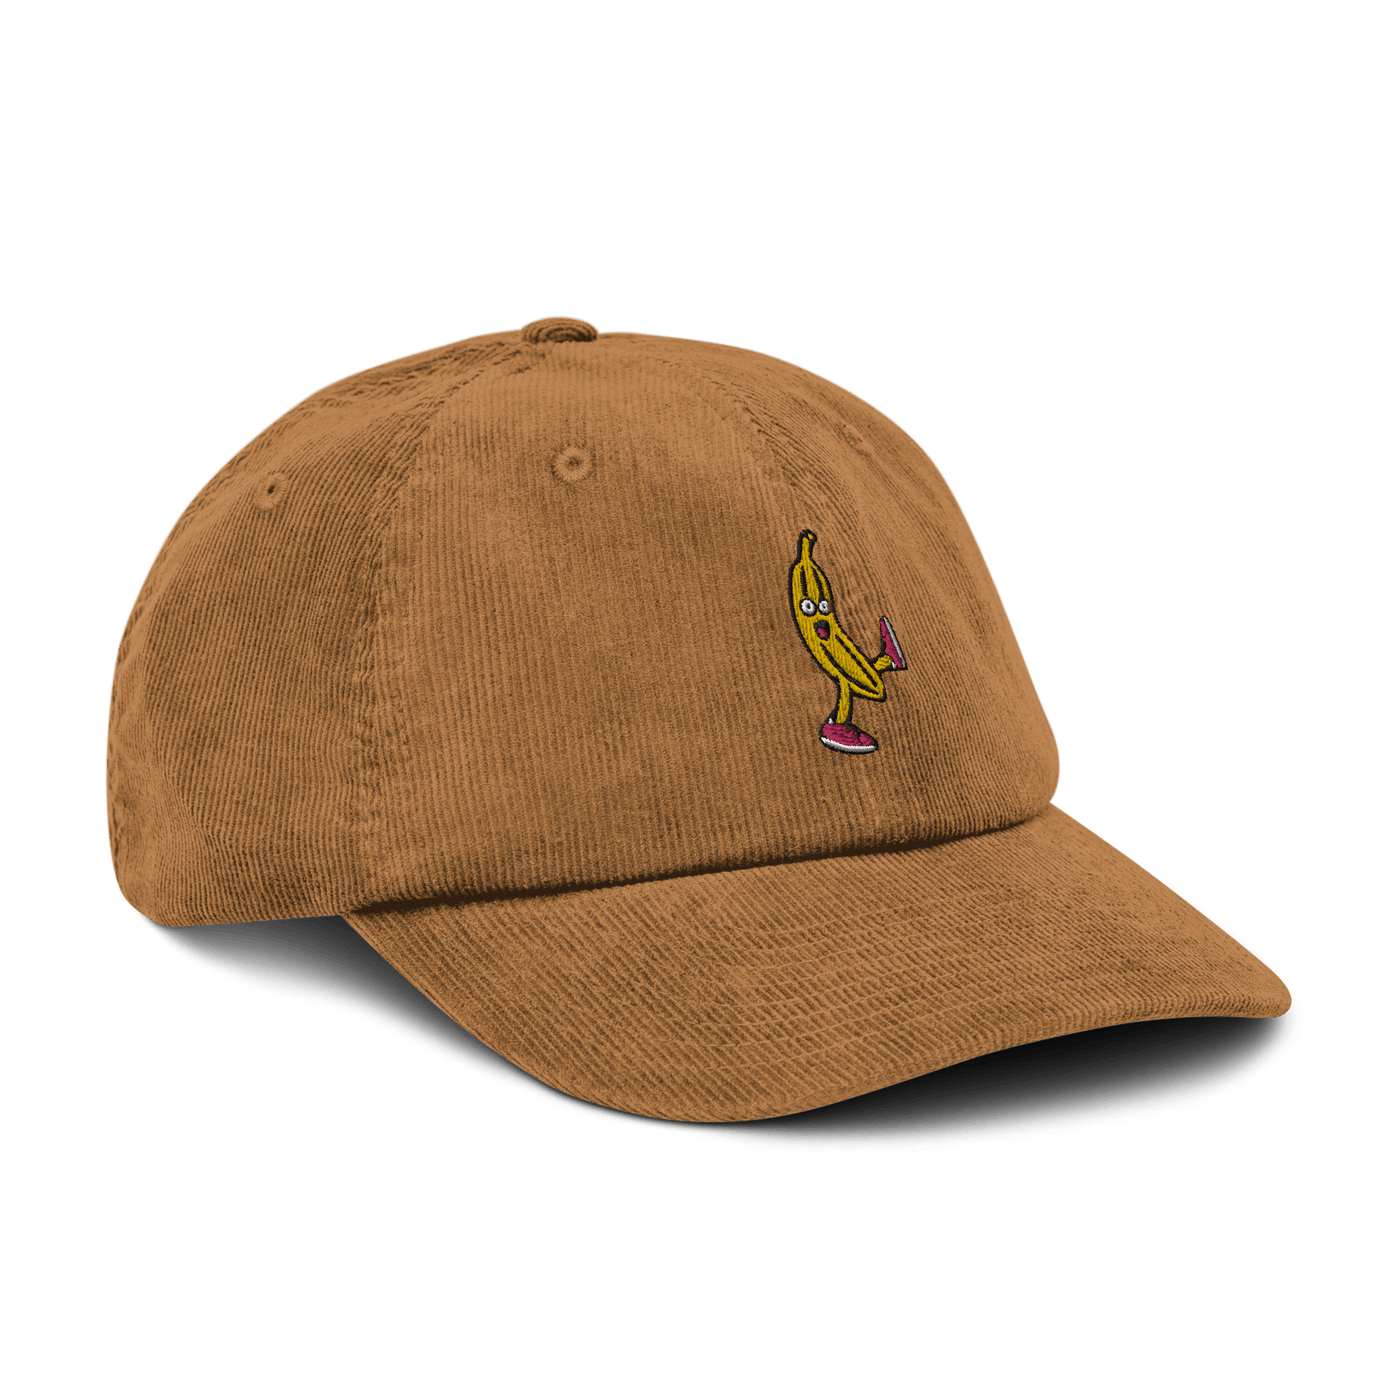 Drunk Banana Corduroy hat - Camel - - Just Another Cap Store